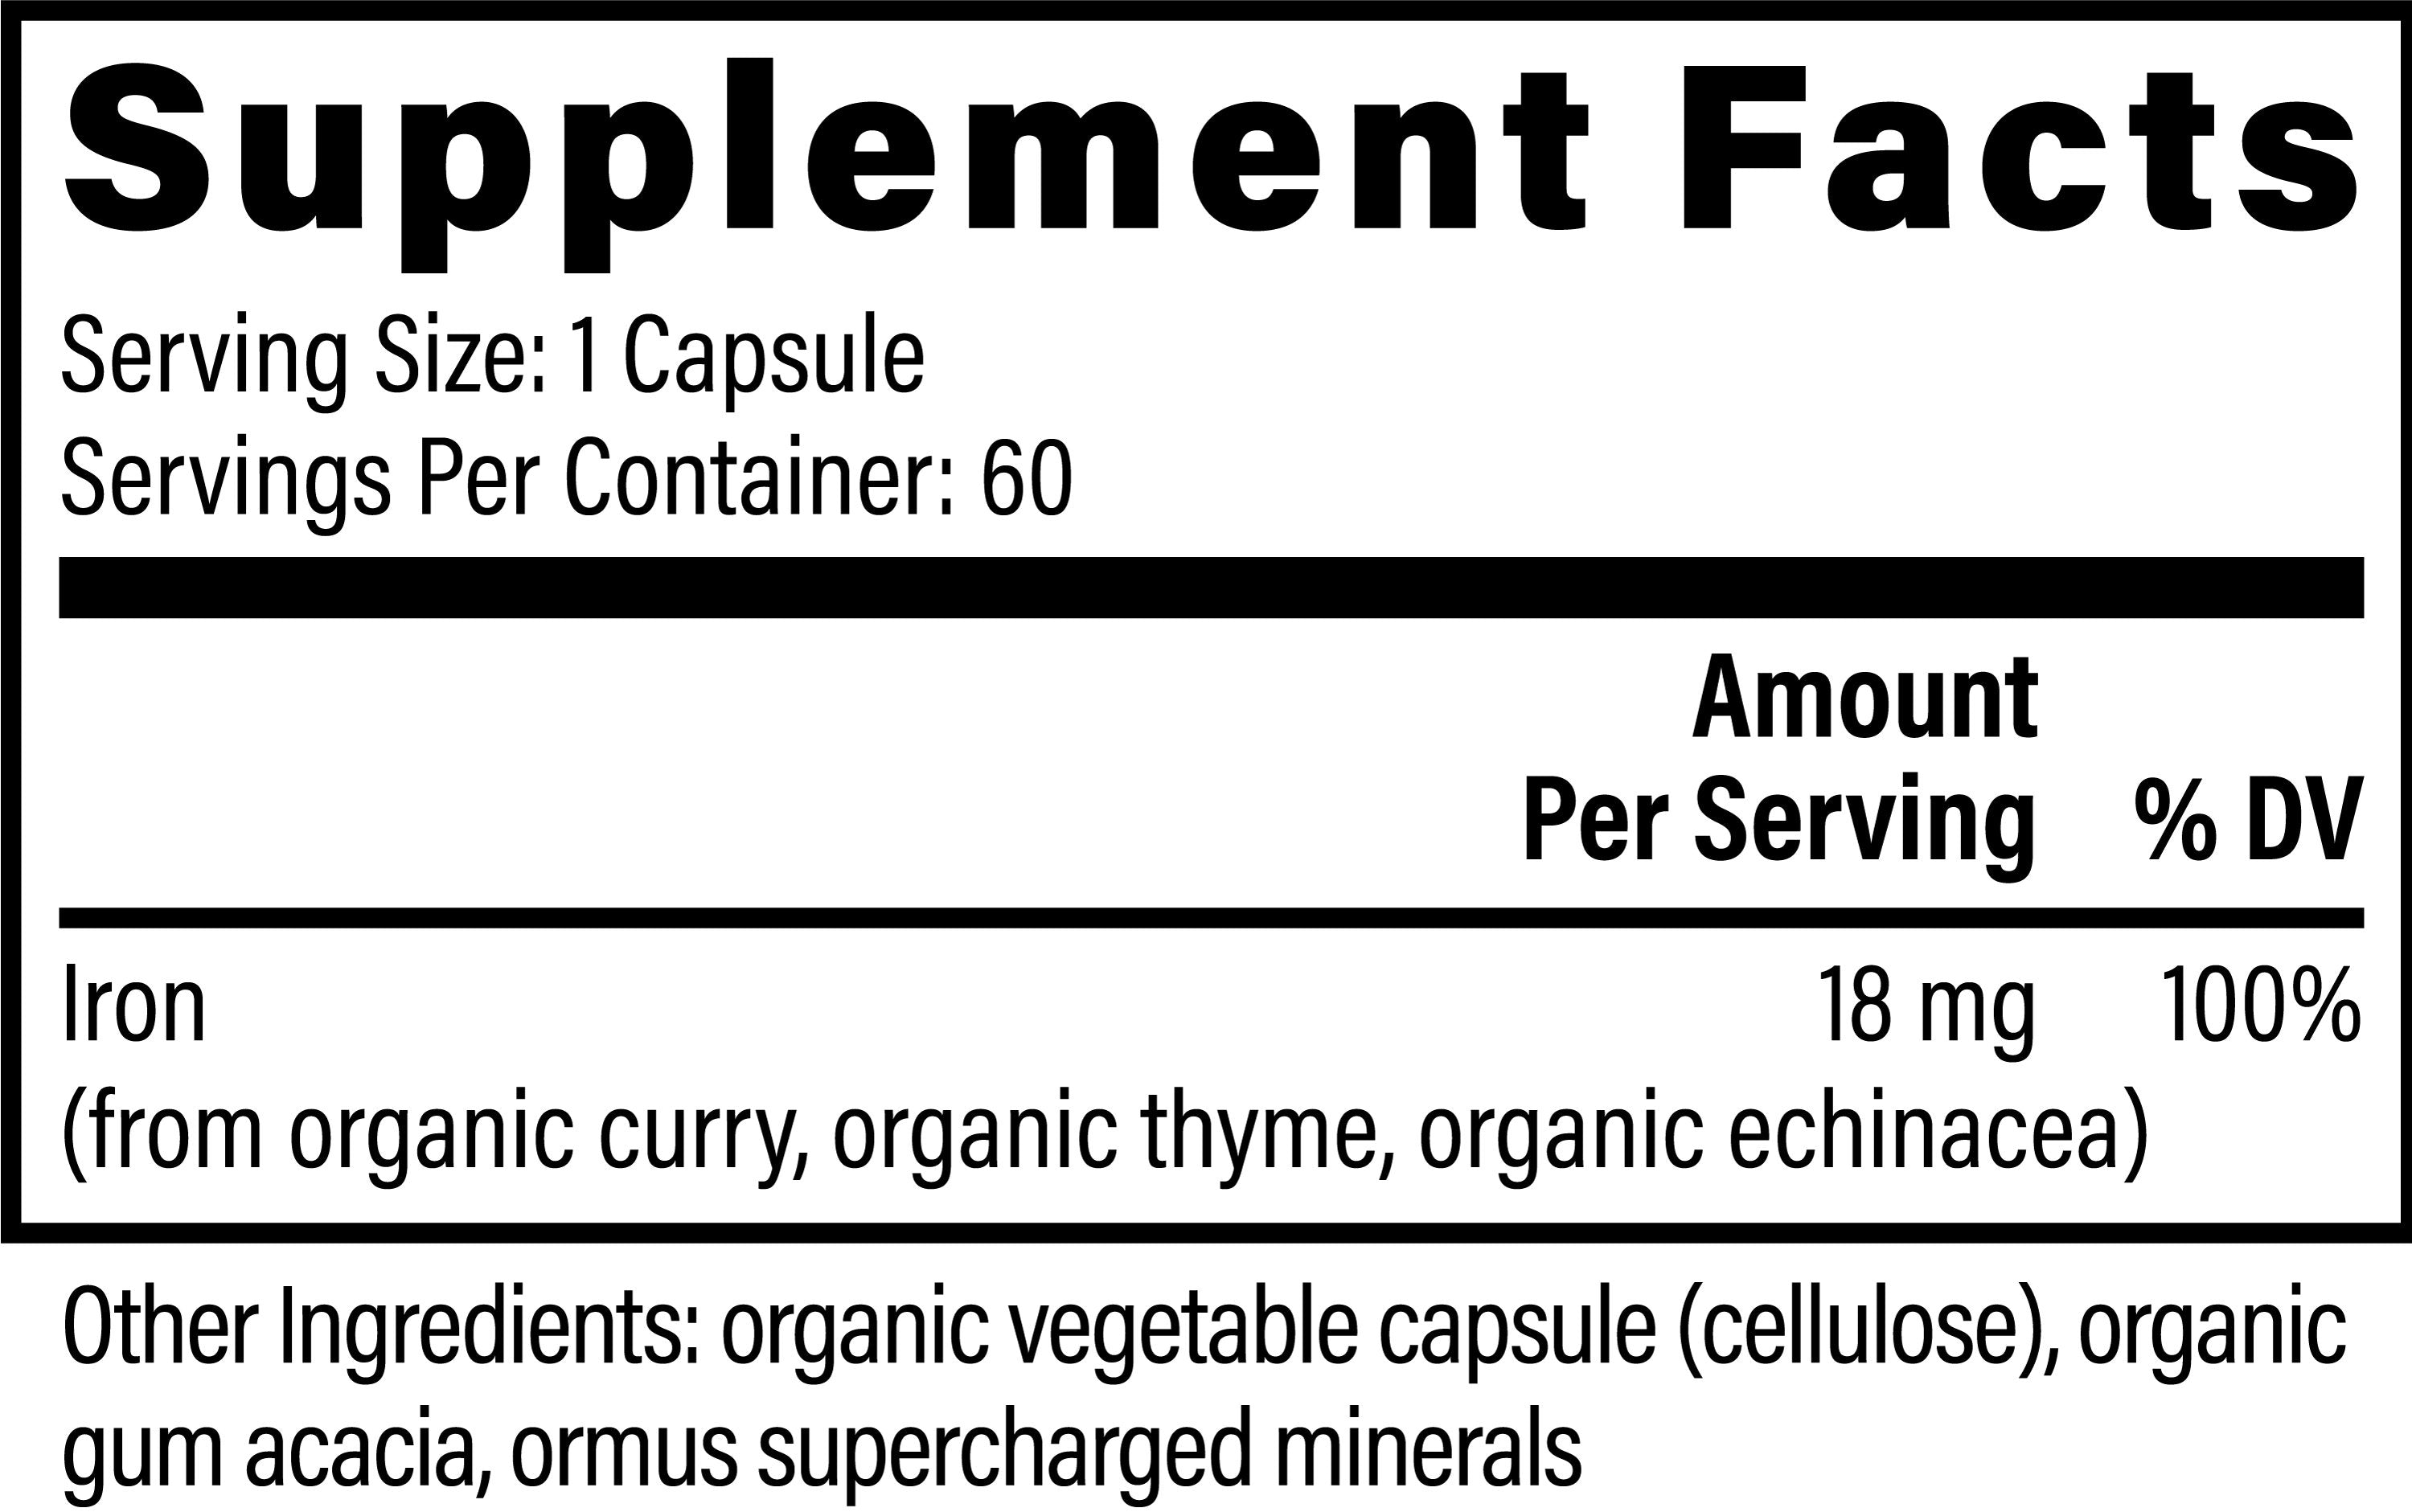 Global Healing Plant Based Iron From Curry Thyme and Echinacea Supplement Facts 60 Capsules